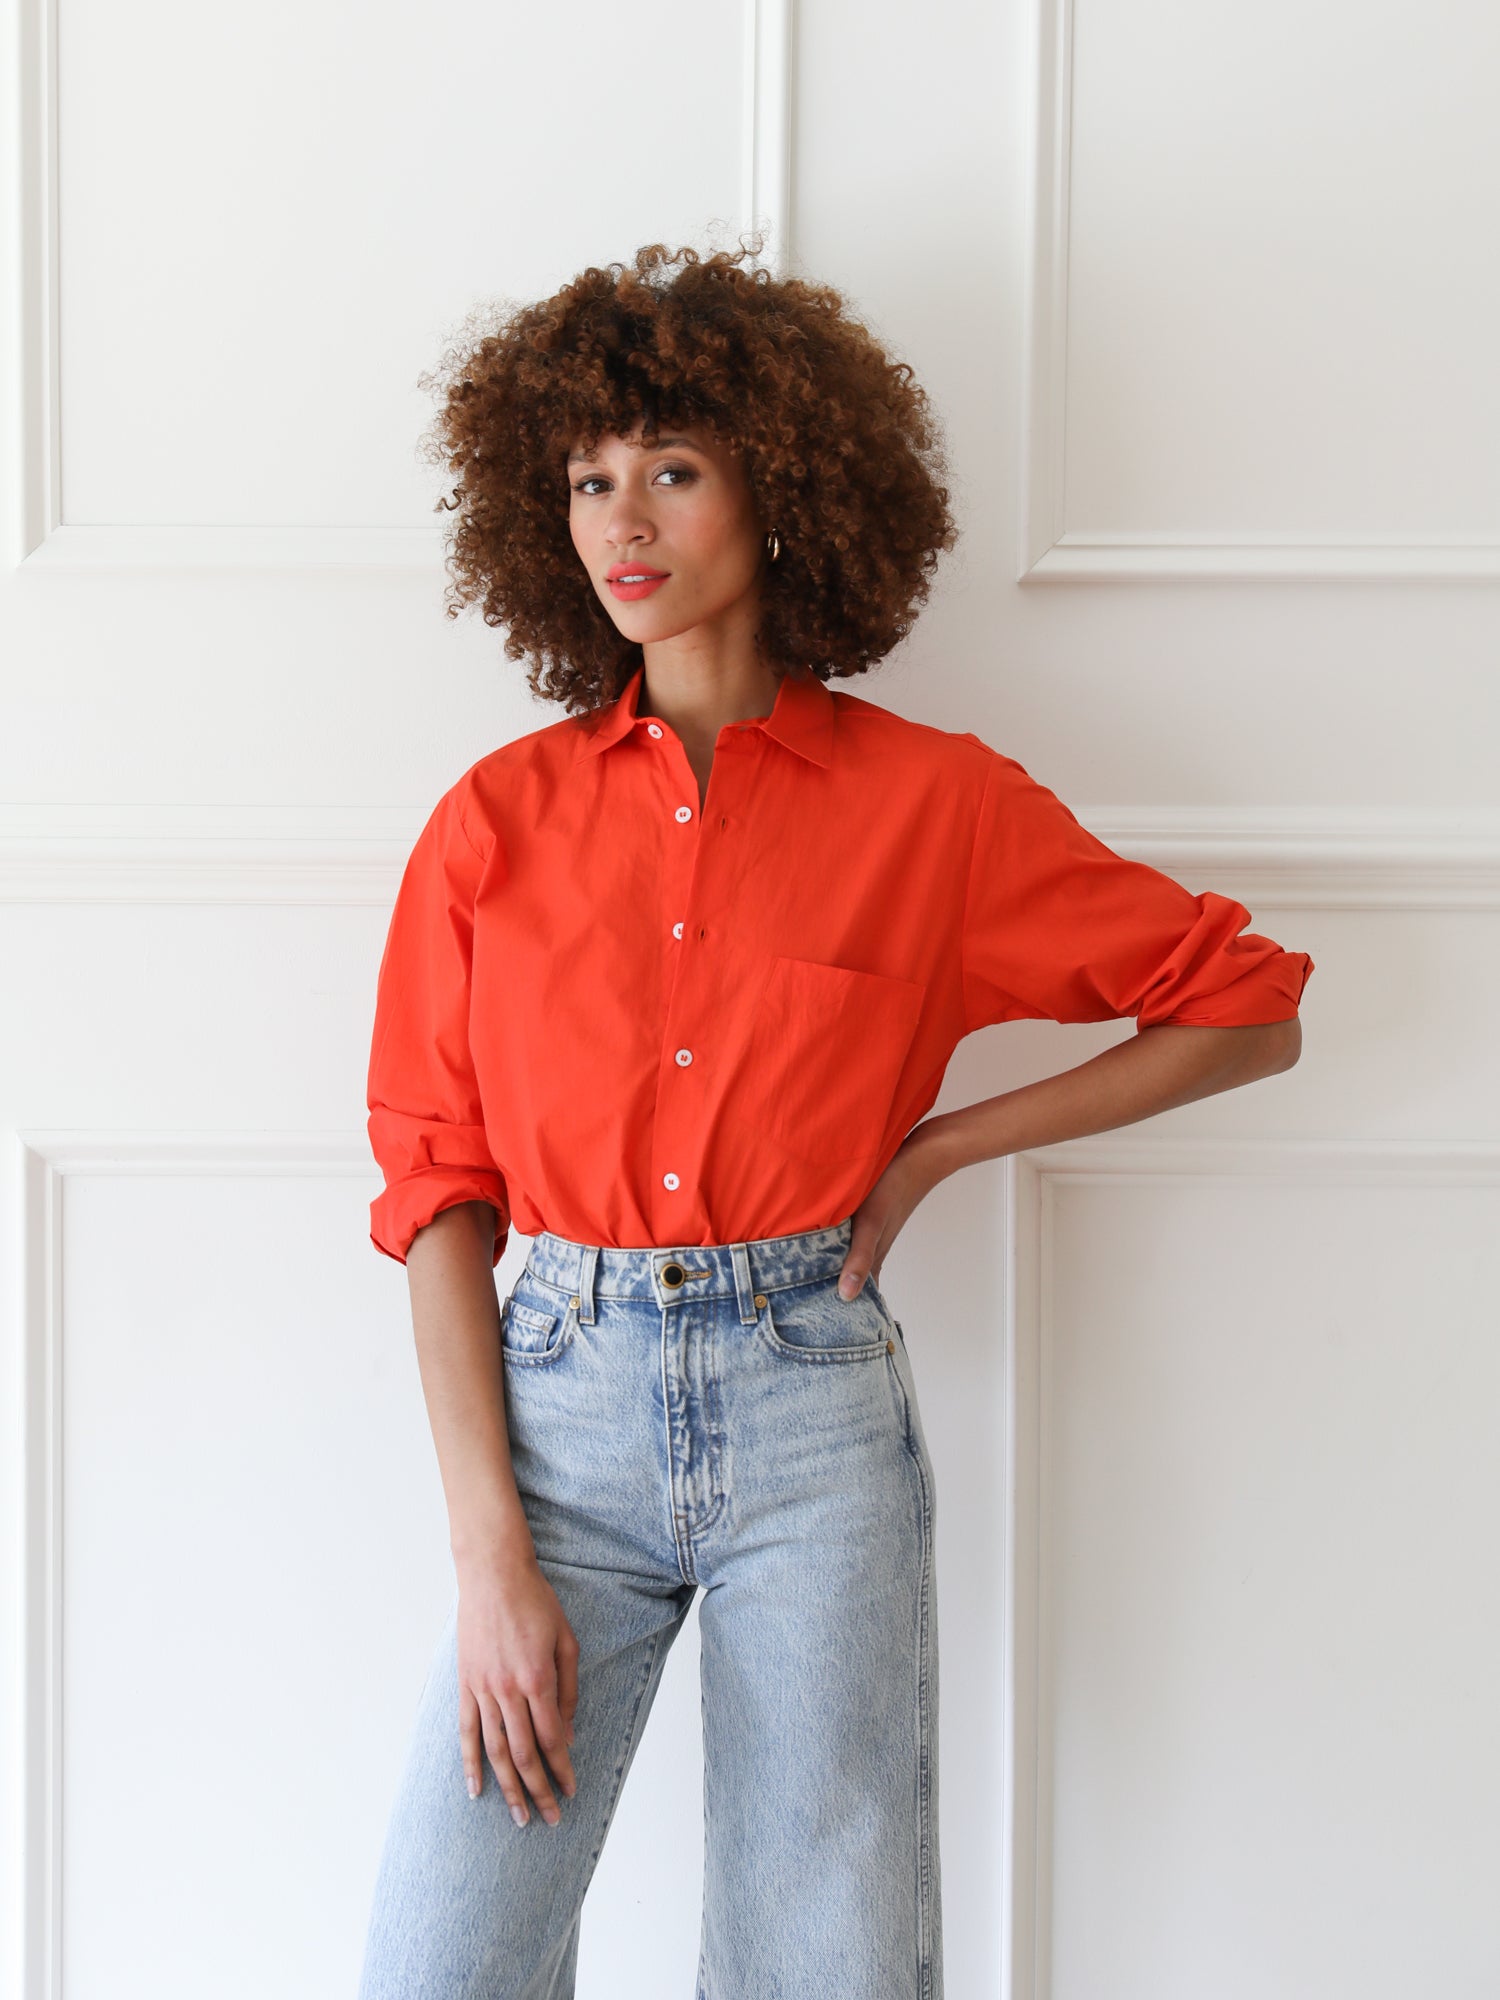 MILLE Clothing Sofia Top in Poppy